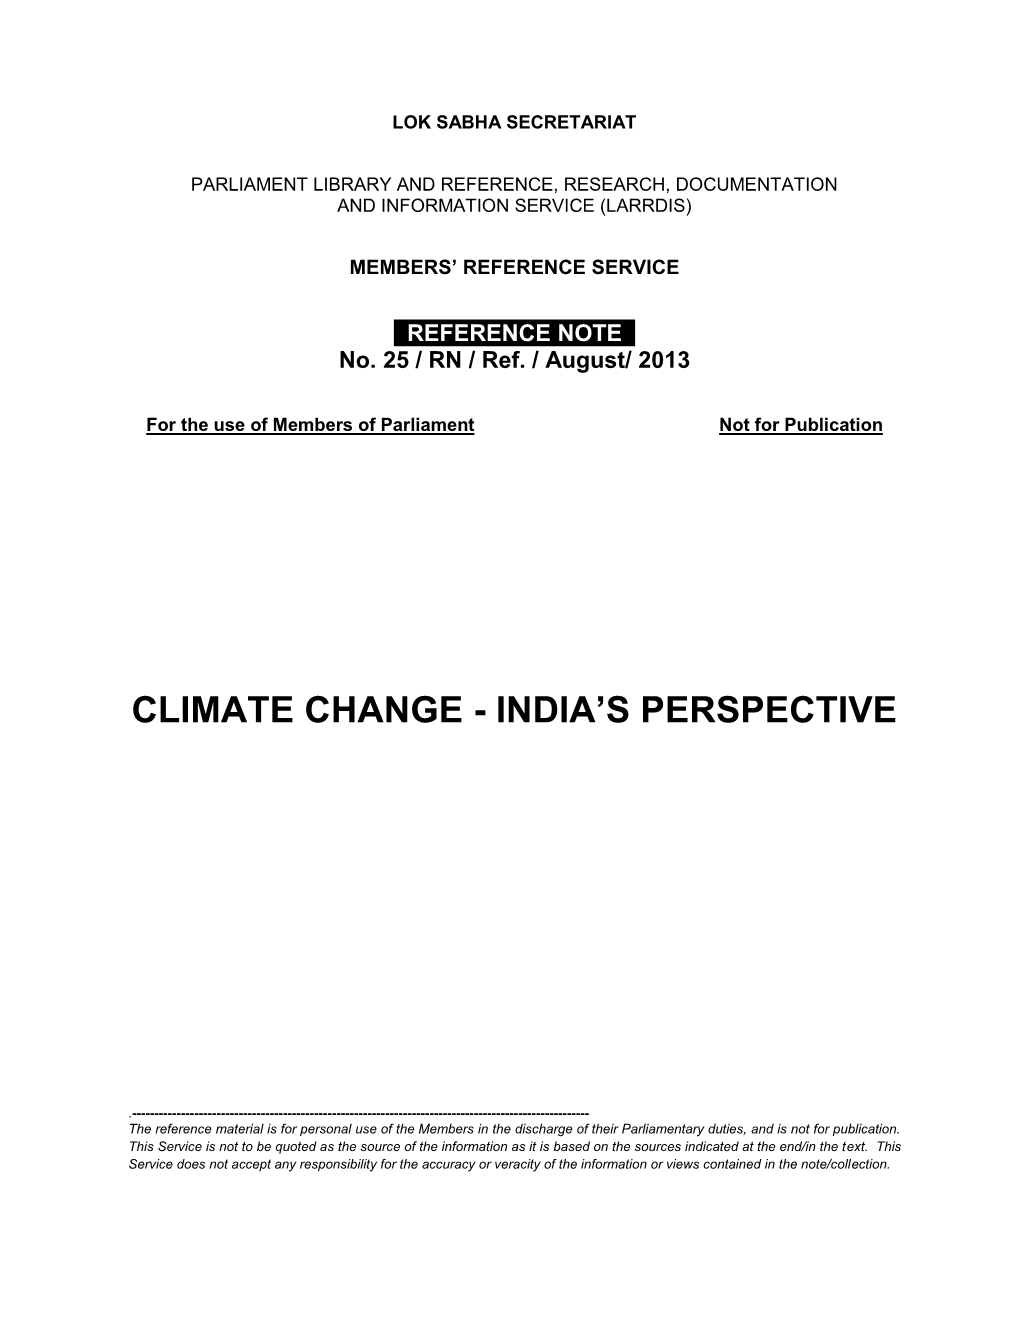 Climate Change - India’S Perspective